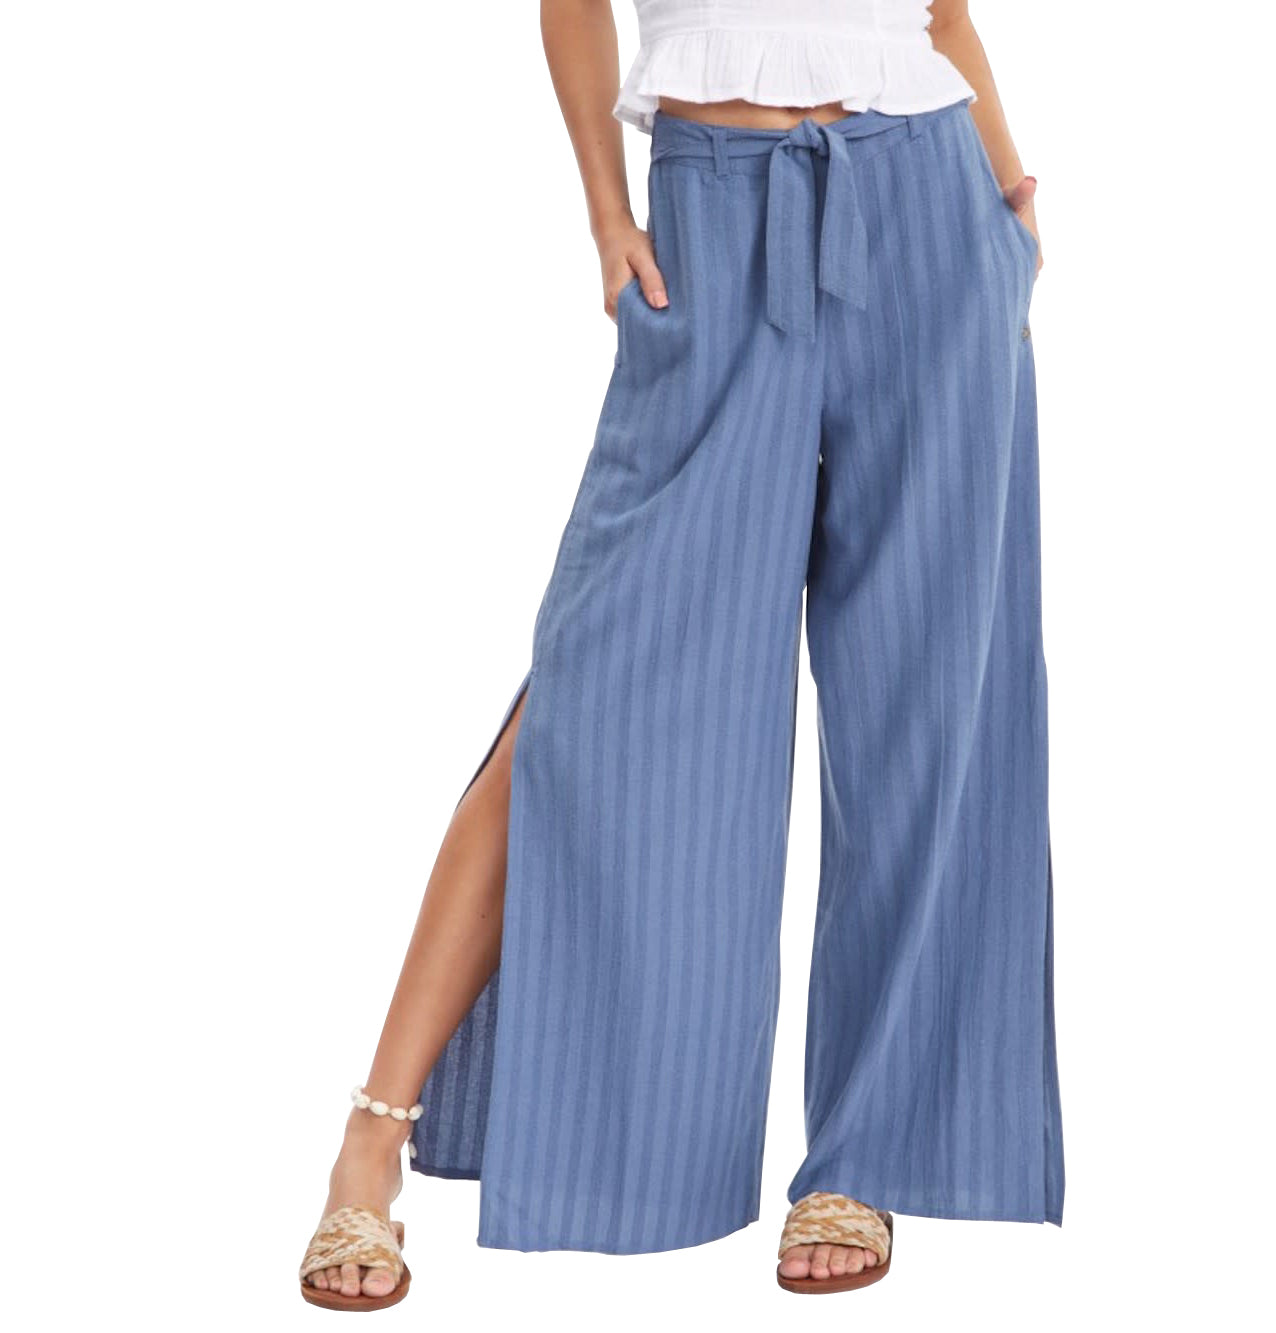 Roxy Sunkissed Pant BNG0 M